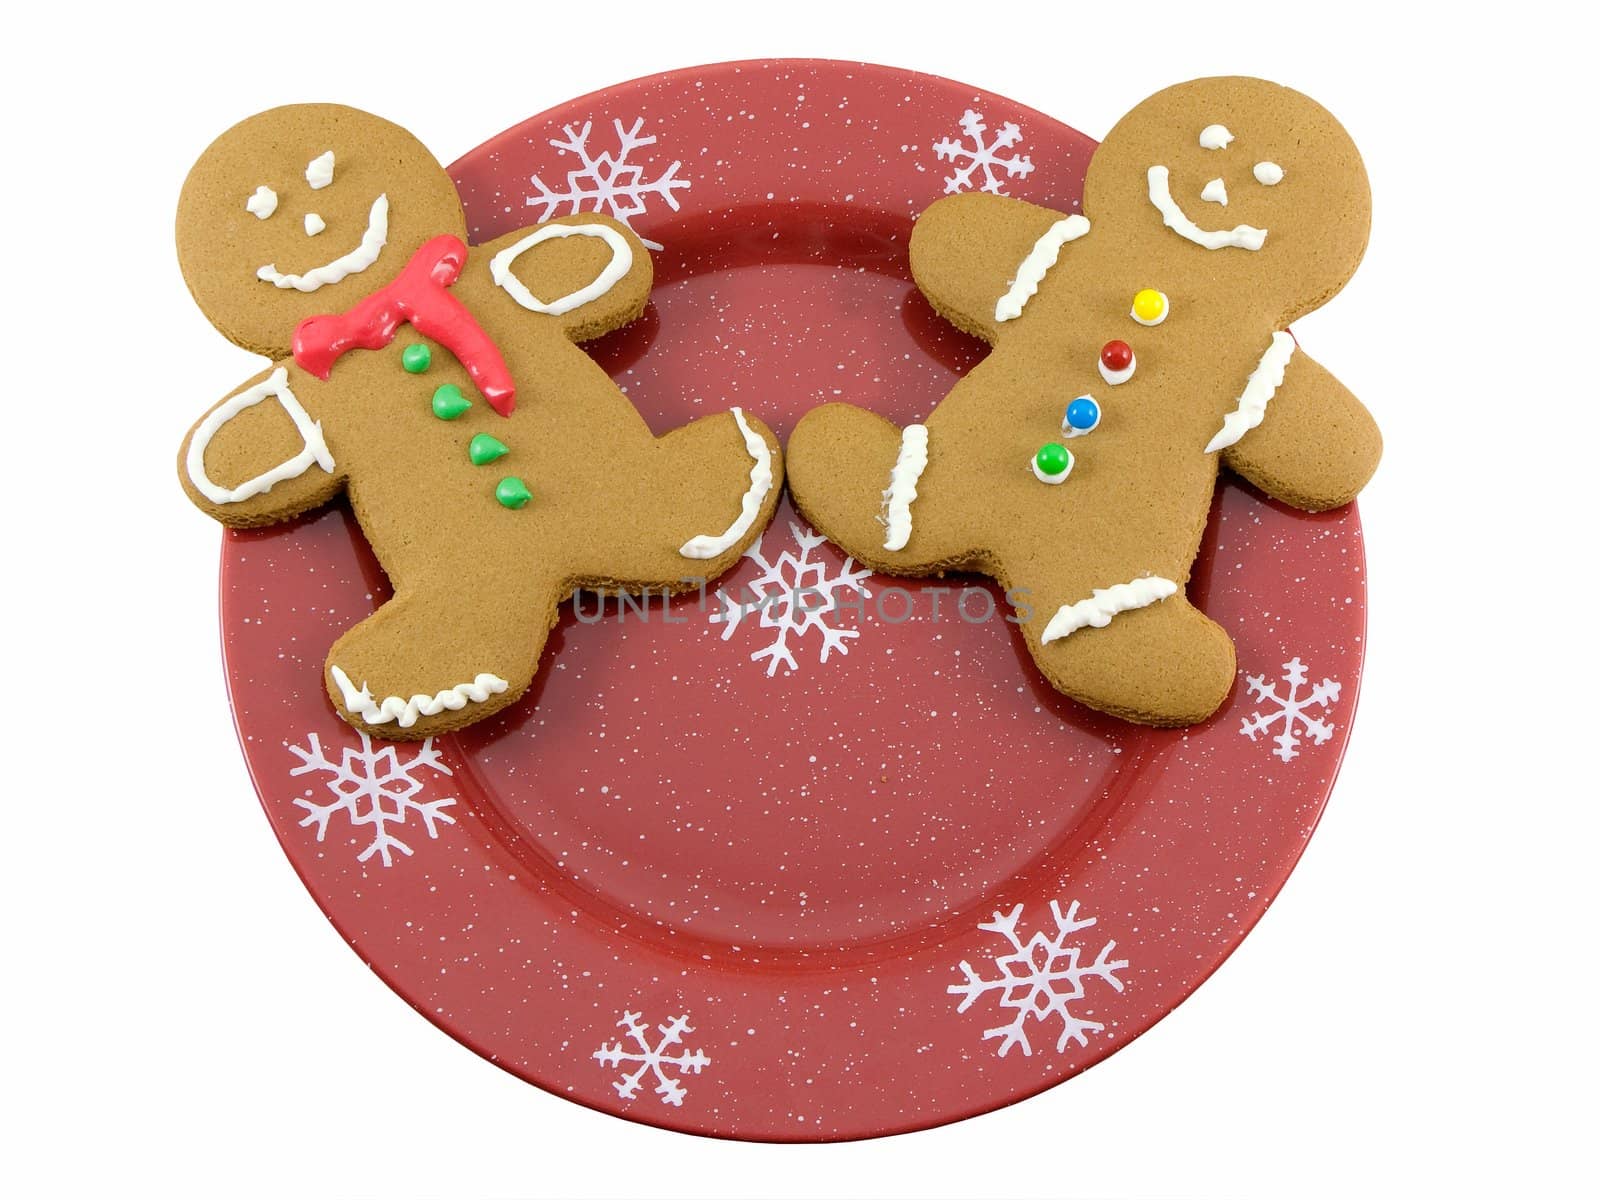 Gingerbread cookies on a christmas plate, isolated on white